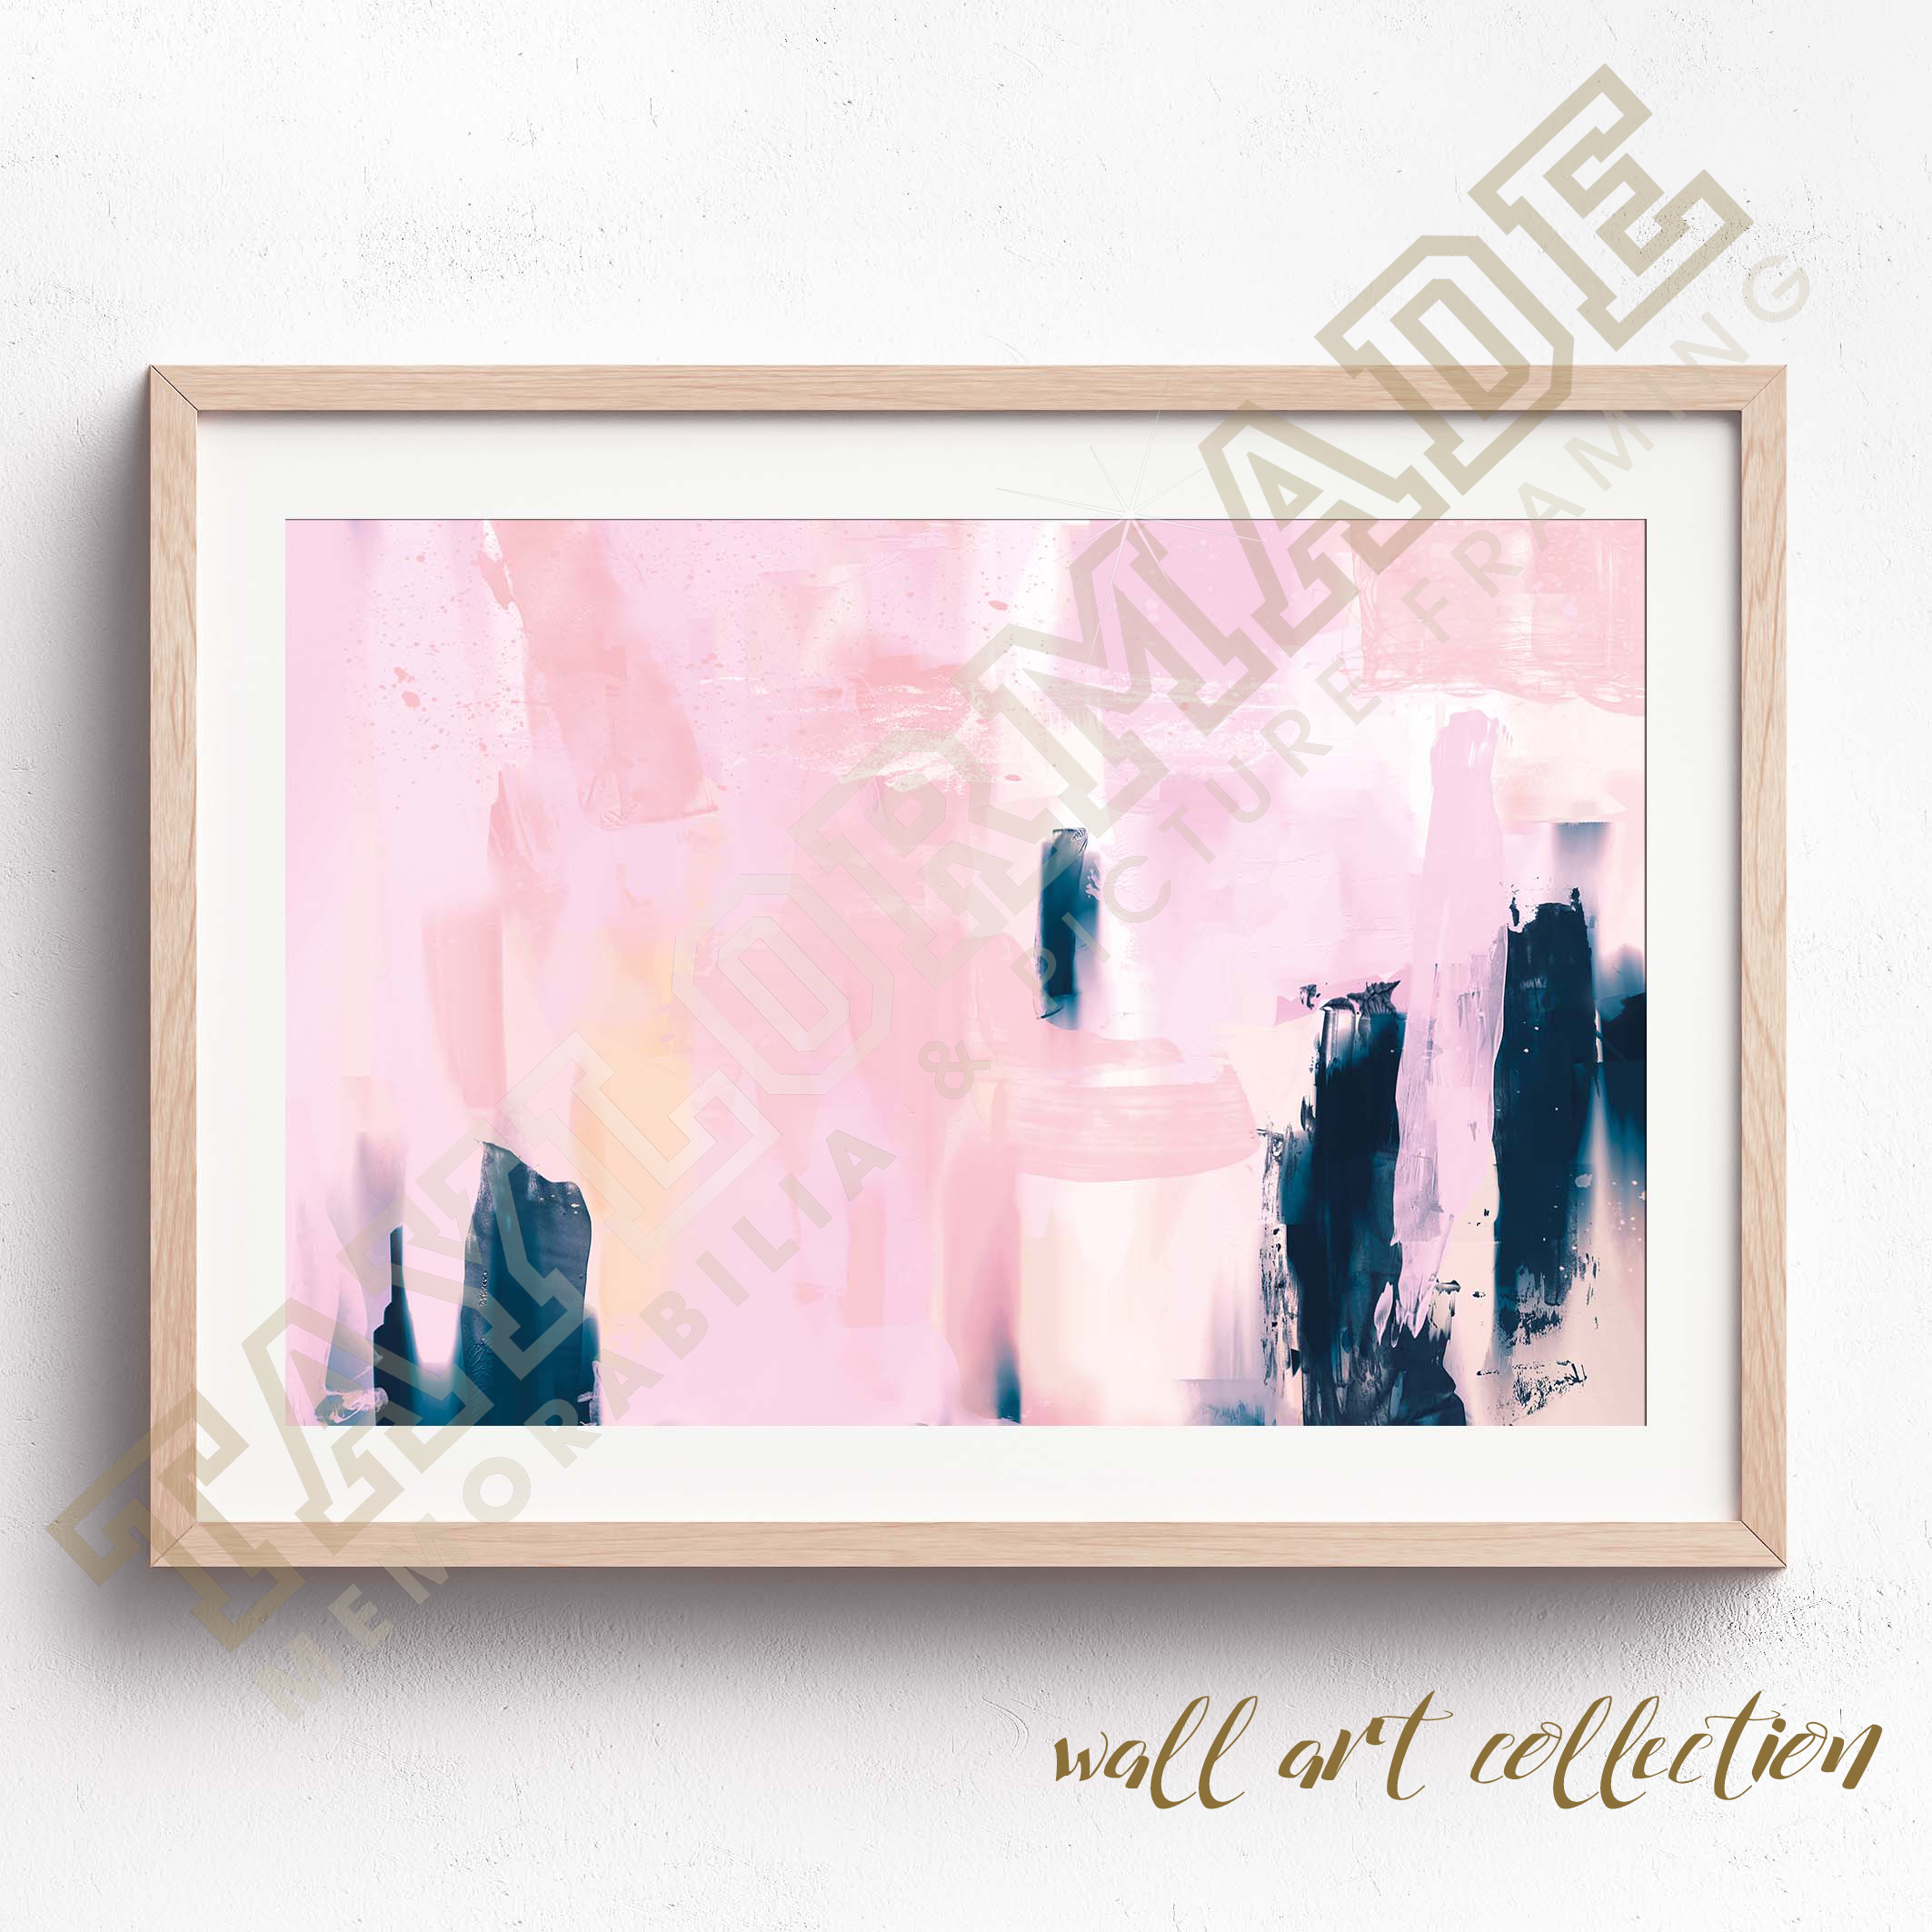 Wall Art Collection – Pink Strokes